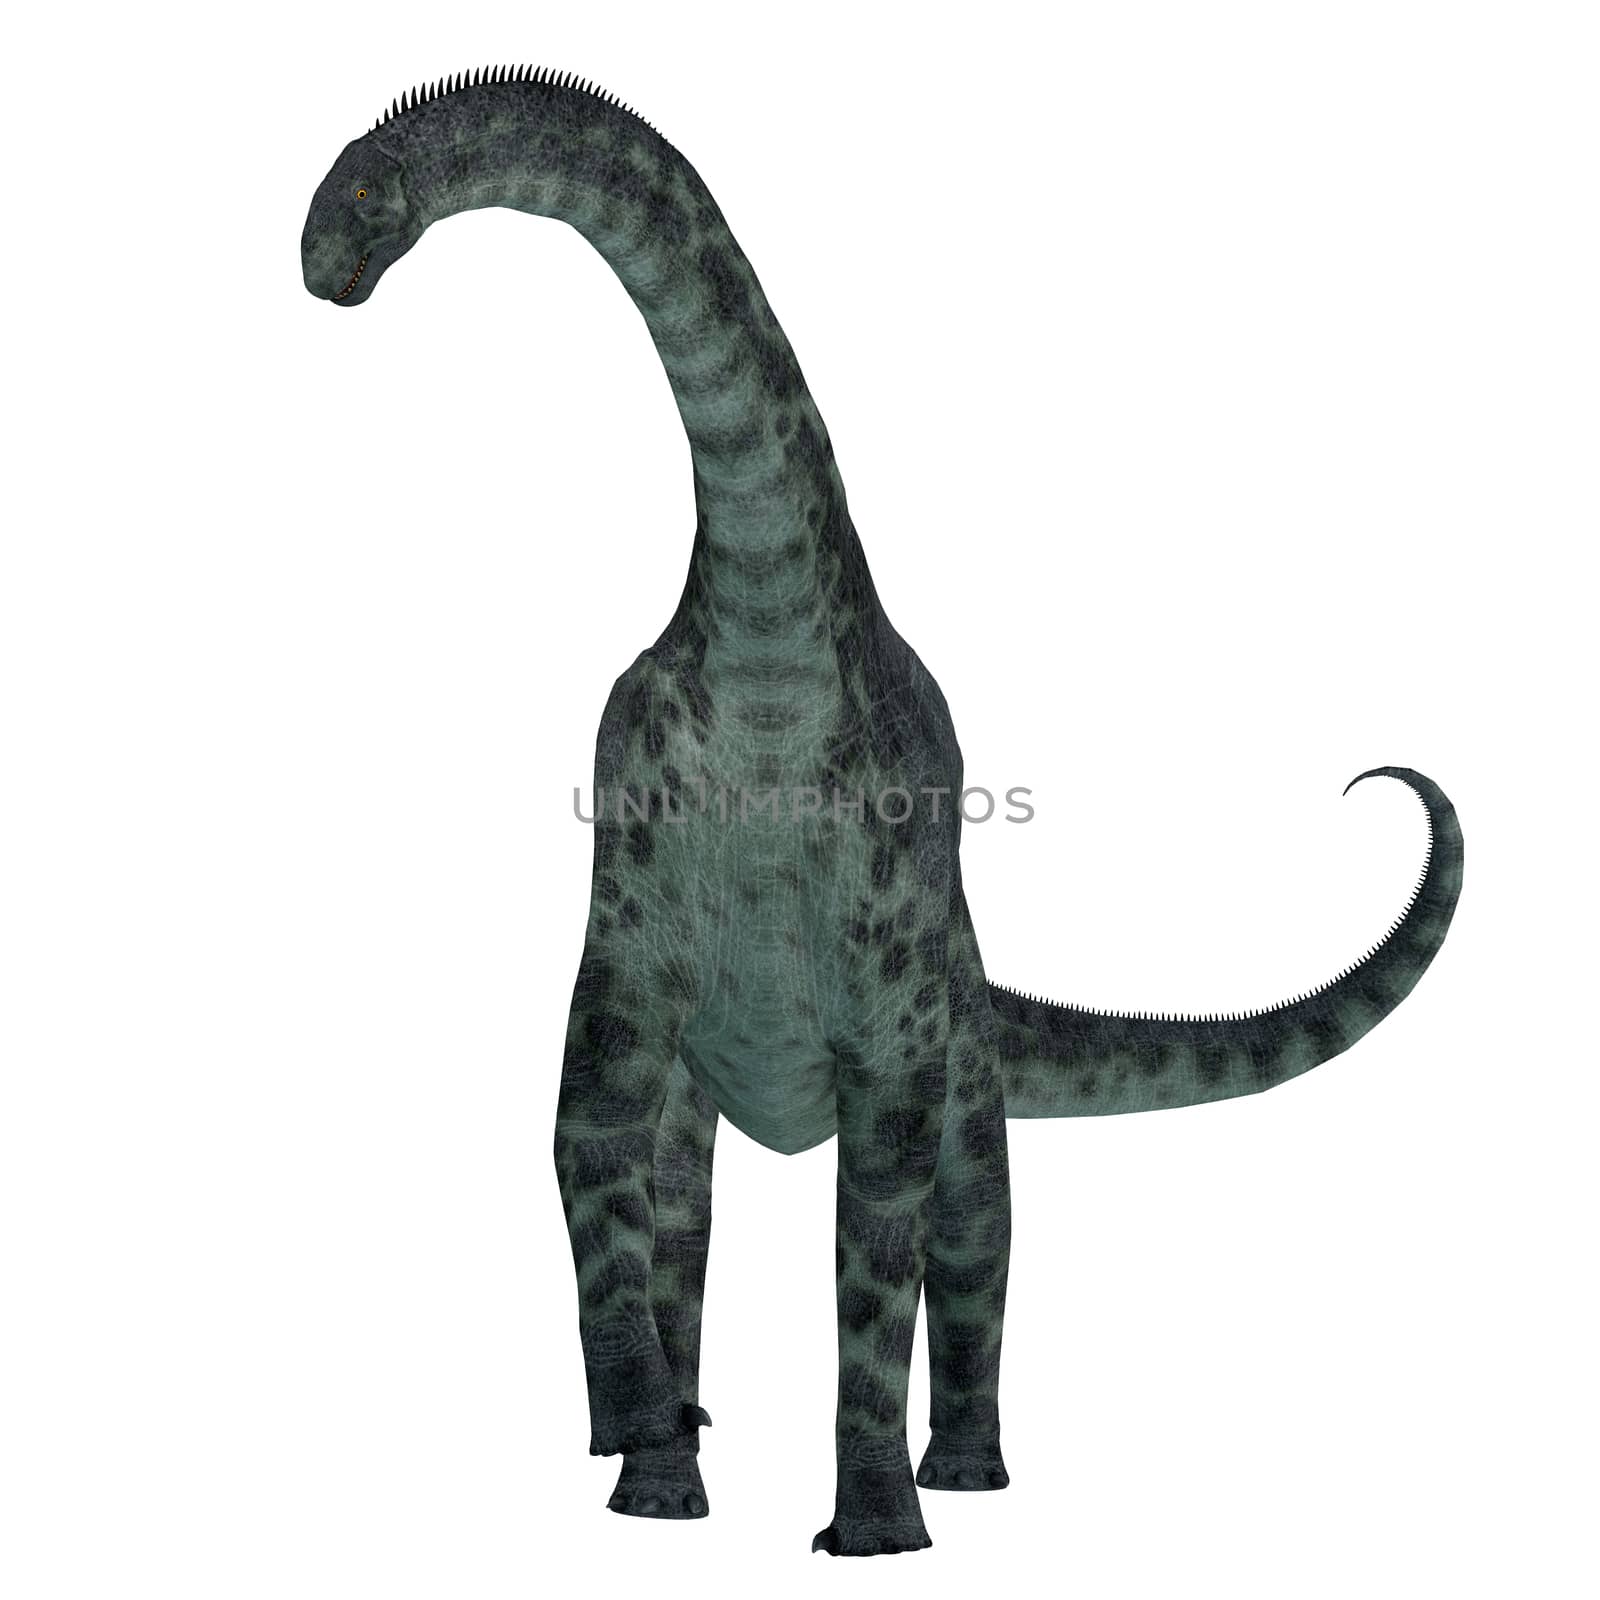 Cetiosaurus was a herbivorous sauropod dinosaur that lived in Morocco, Africa in the Jurassic Period.